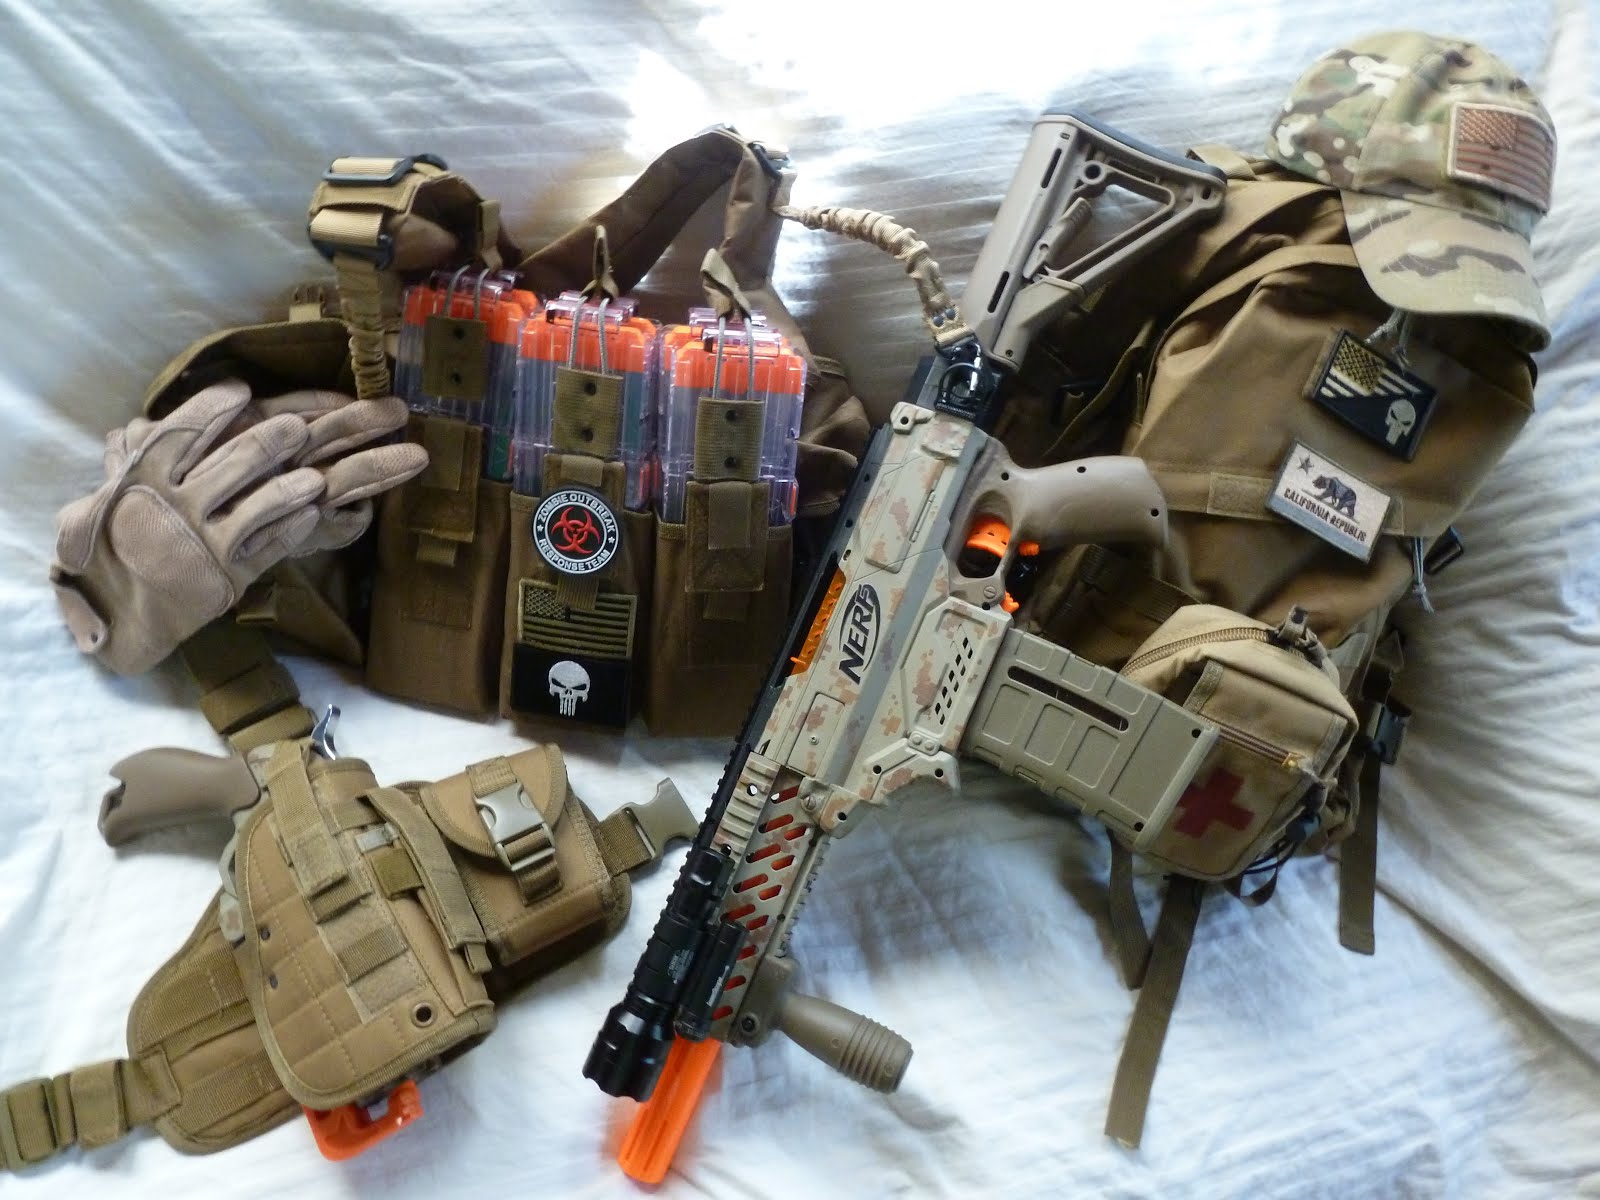 Lastly, here's an example of an FTL (Fire Team Leader) load out. 